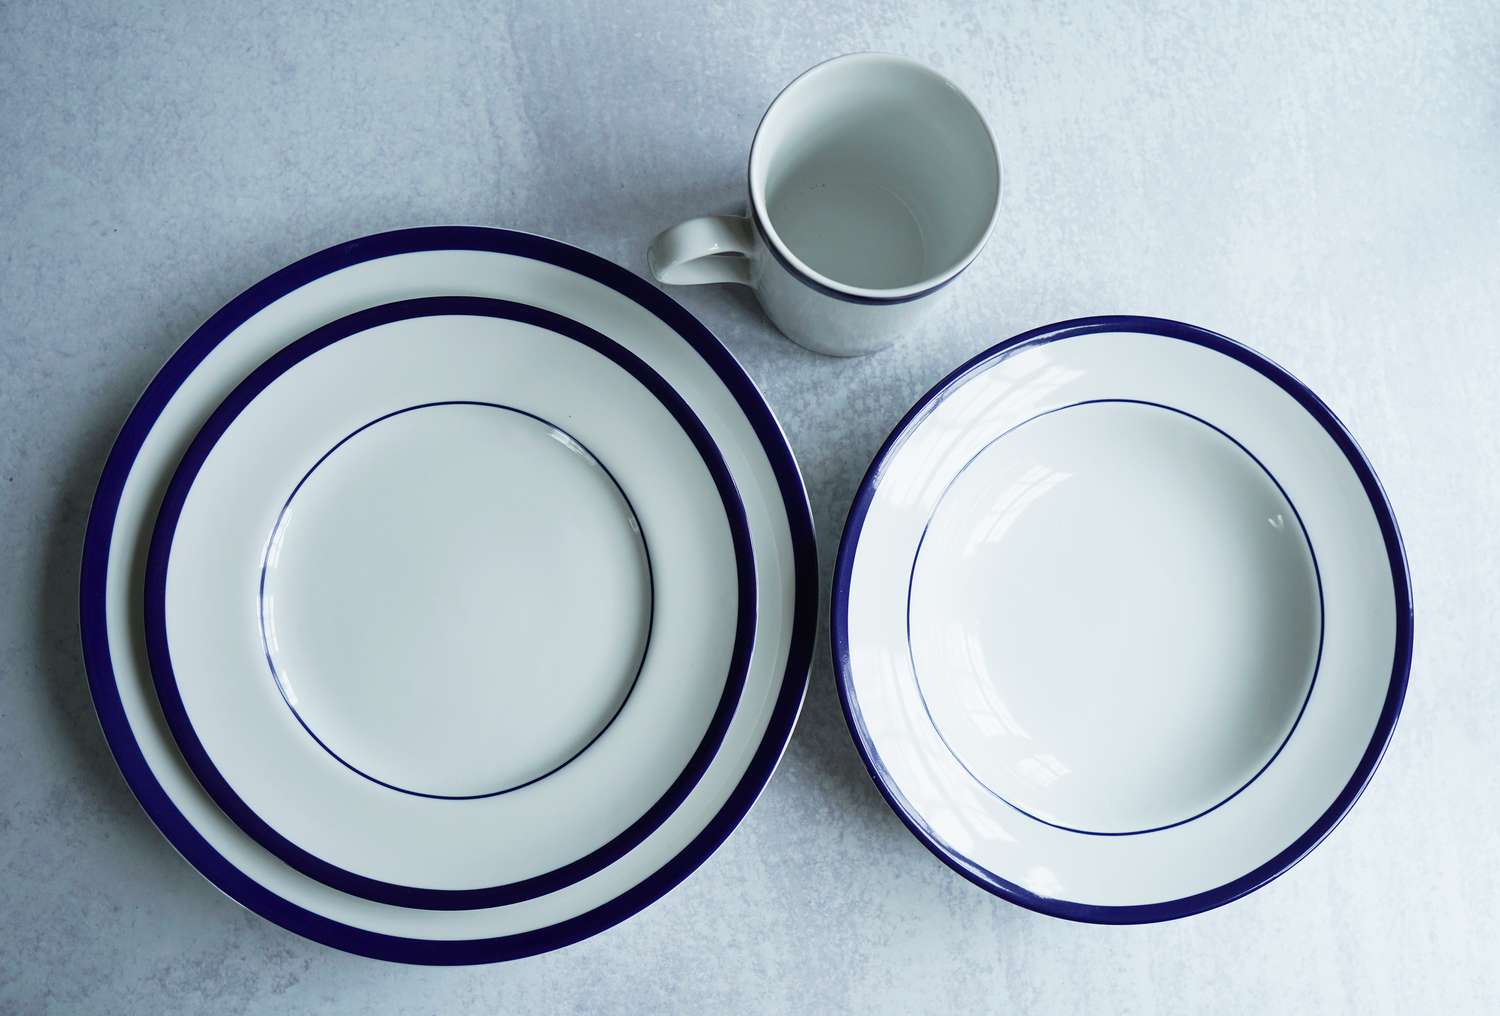 A white and blue dinnerware set on a grey surface